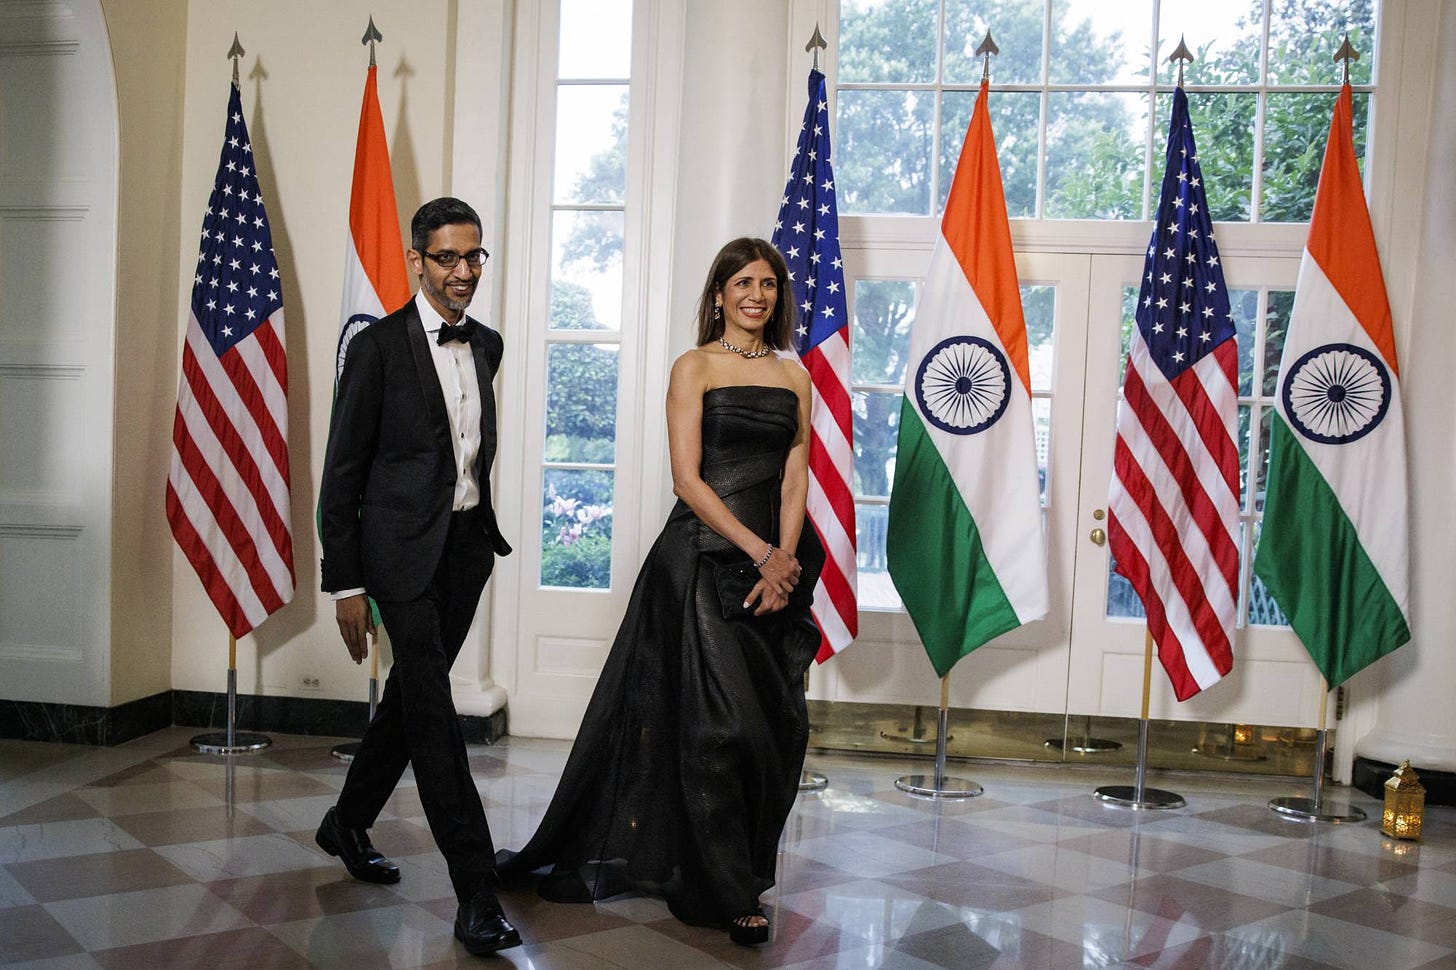 Sundar Pichai, chief executive of Alphabet, and his wife Anjali arrive for a state dinner at the White House in honor of Prime Minister Narendra Modi of India on June 22. | SAMUEL CORUM / THE NEW YORK TIMES